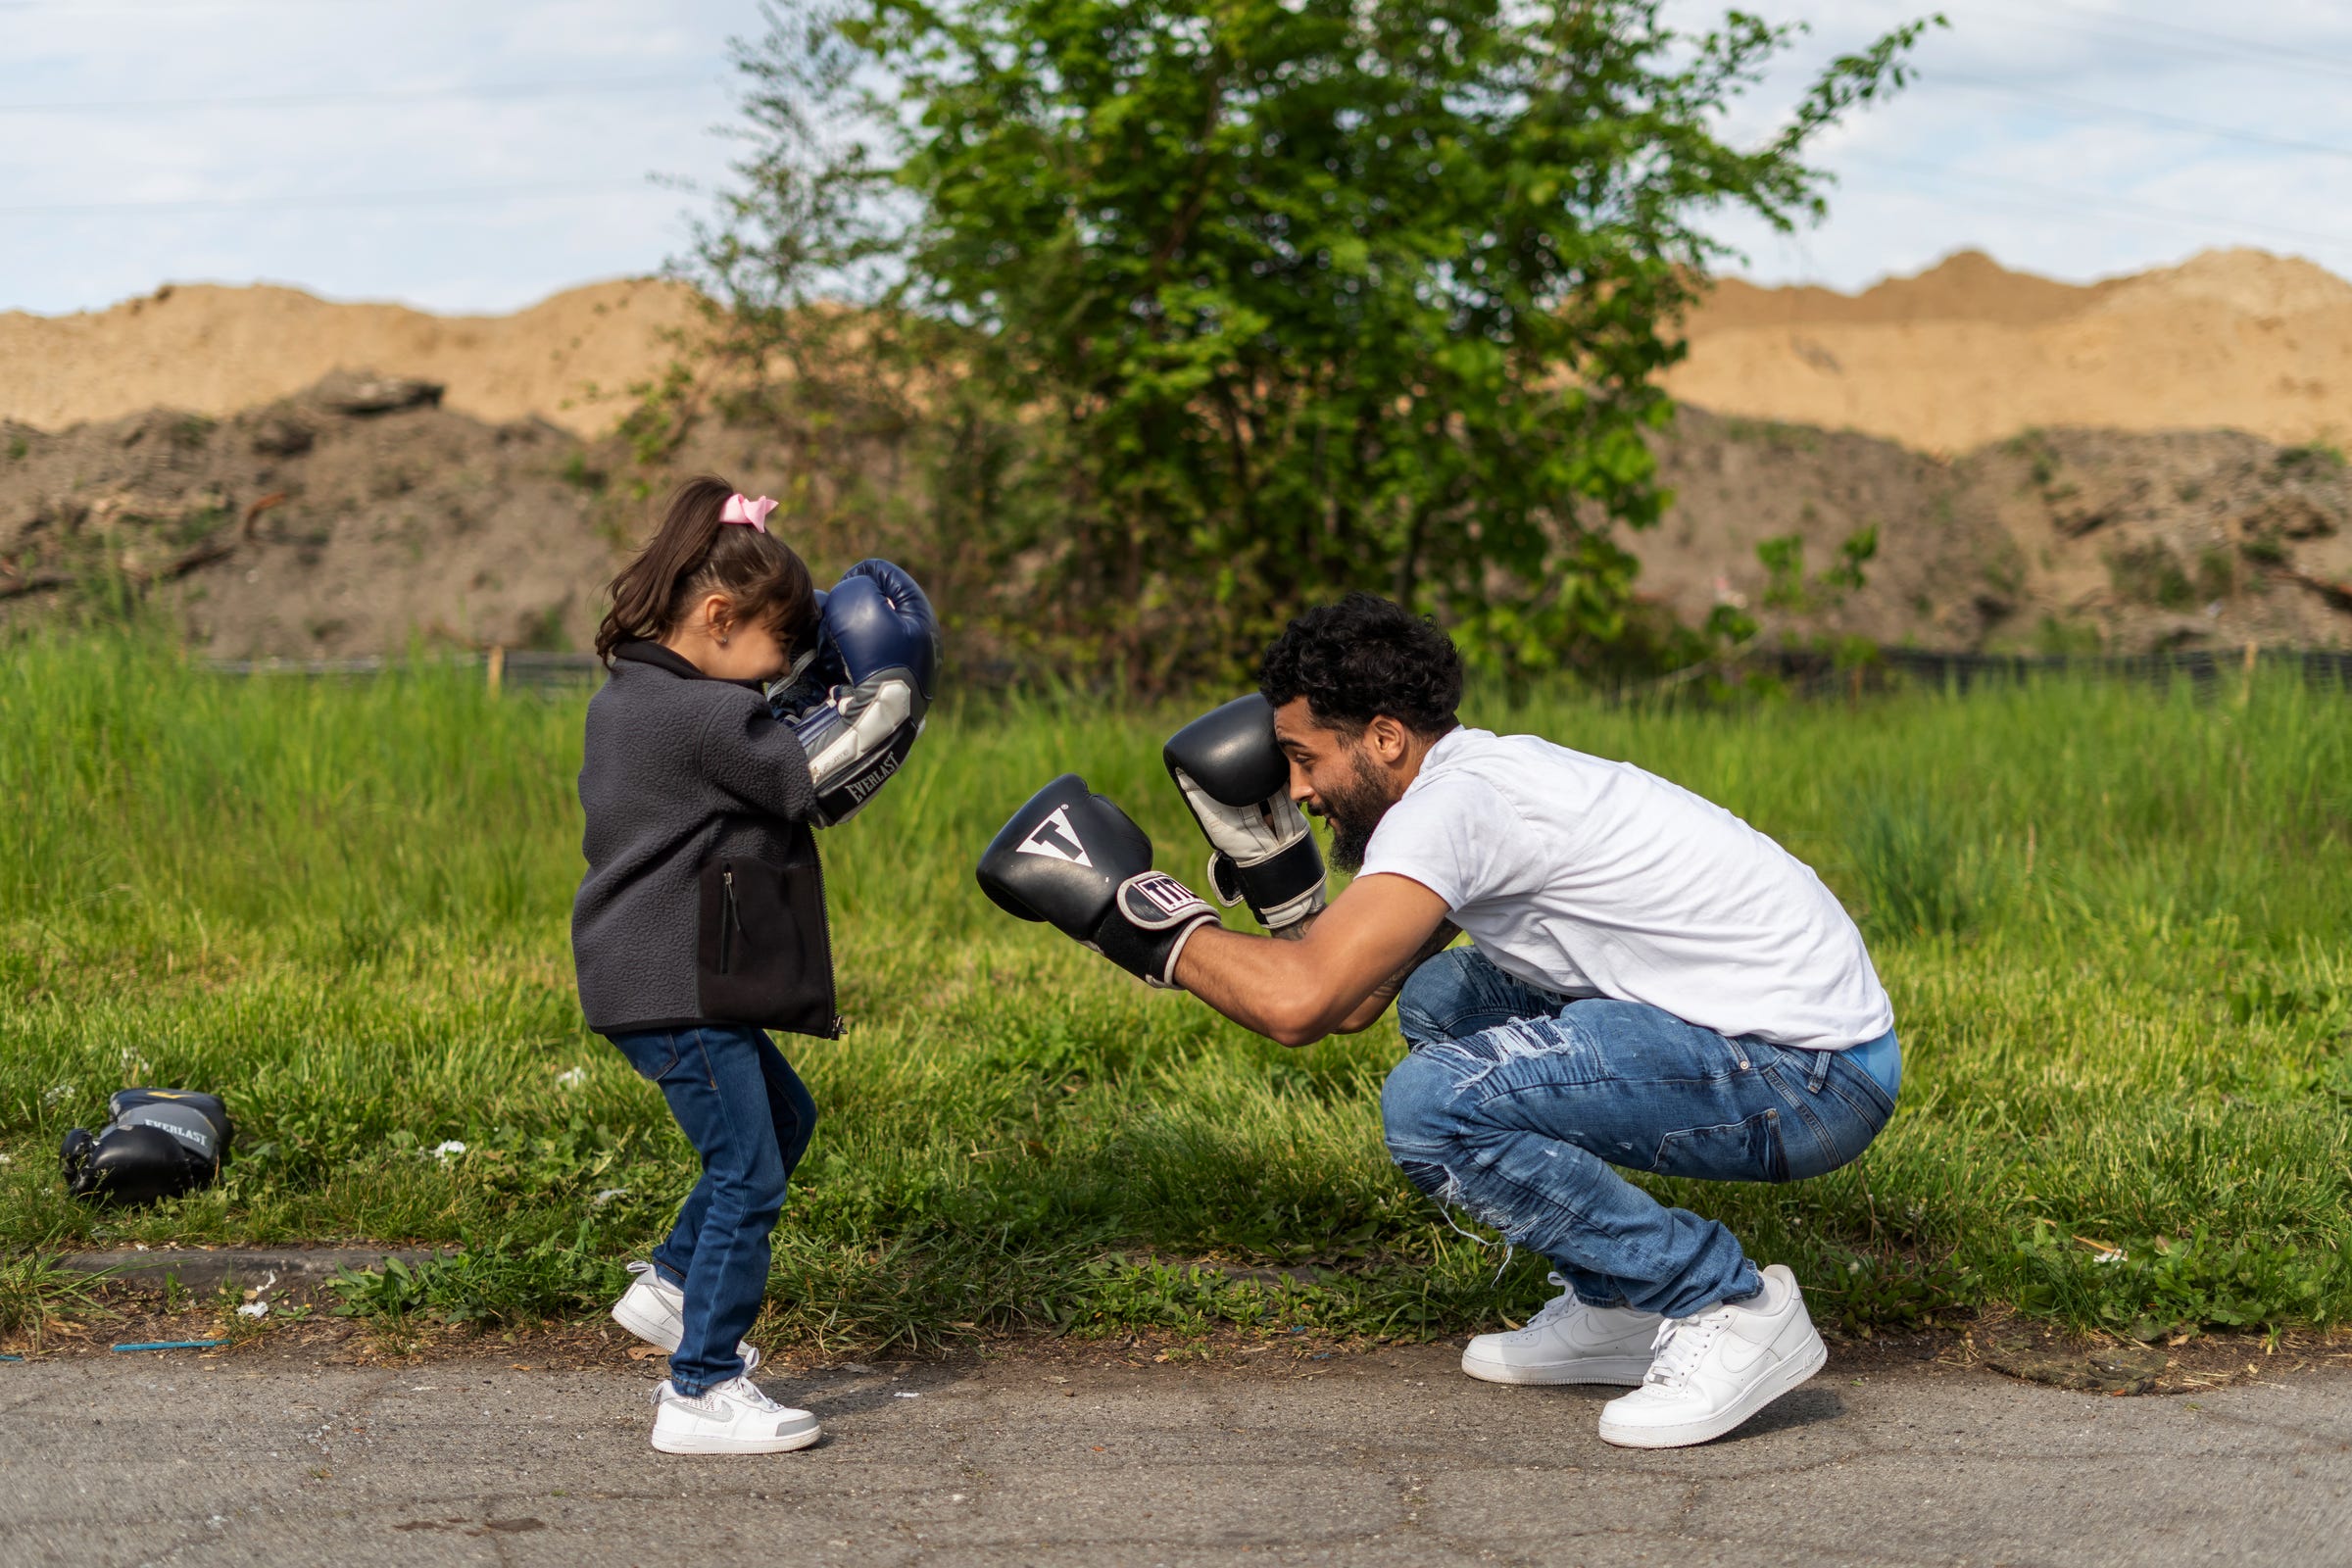 Dwayne Taylor, of Lincoln Park, puts on boxing gloves as his daughter Niyah Taylor looks to challenge him while waiting for people to show up for the start of a Pick Your Poison Detroit boxing event run by Taylor in Detroit's Delray neighborhood on Sunday, May 16, 2021.